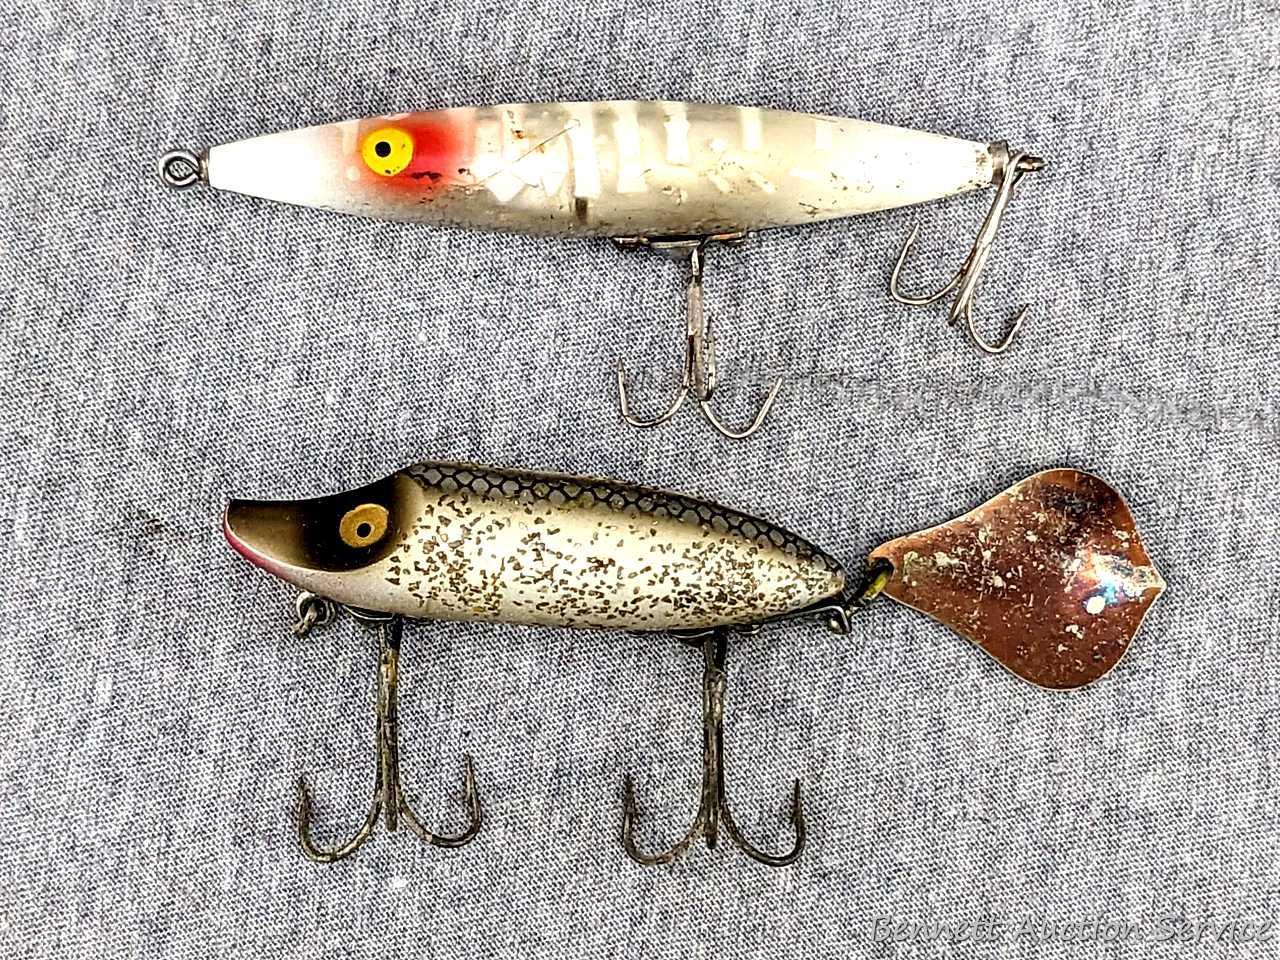 Sold at Auction: VINTAGE FISHING LURES, LOT OF 23